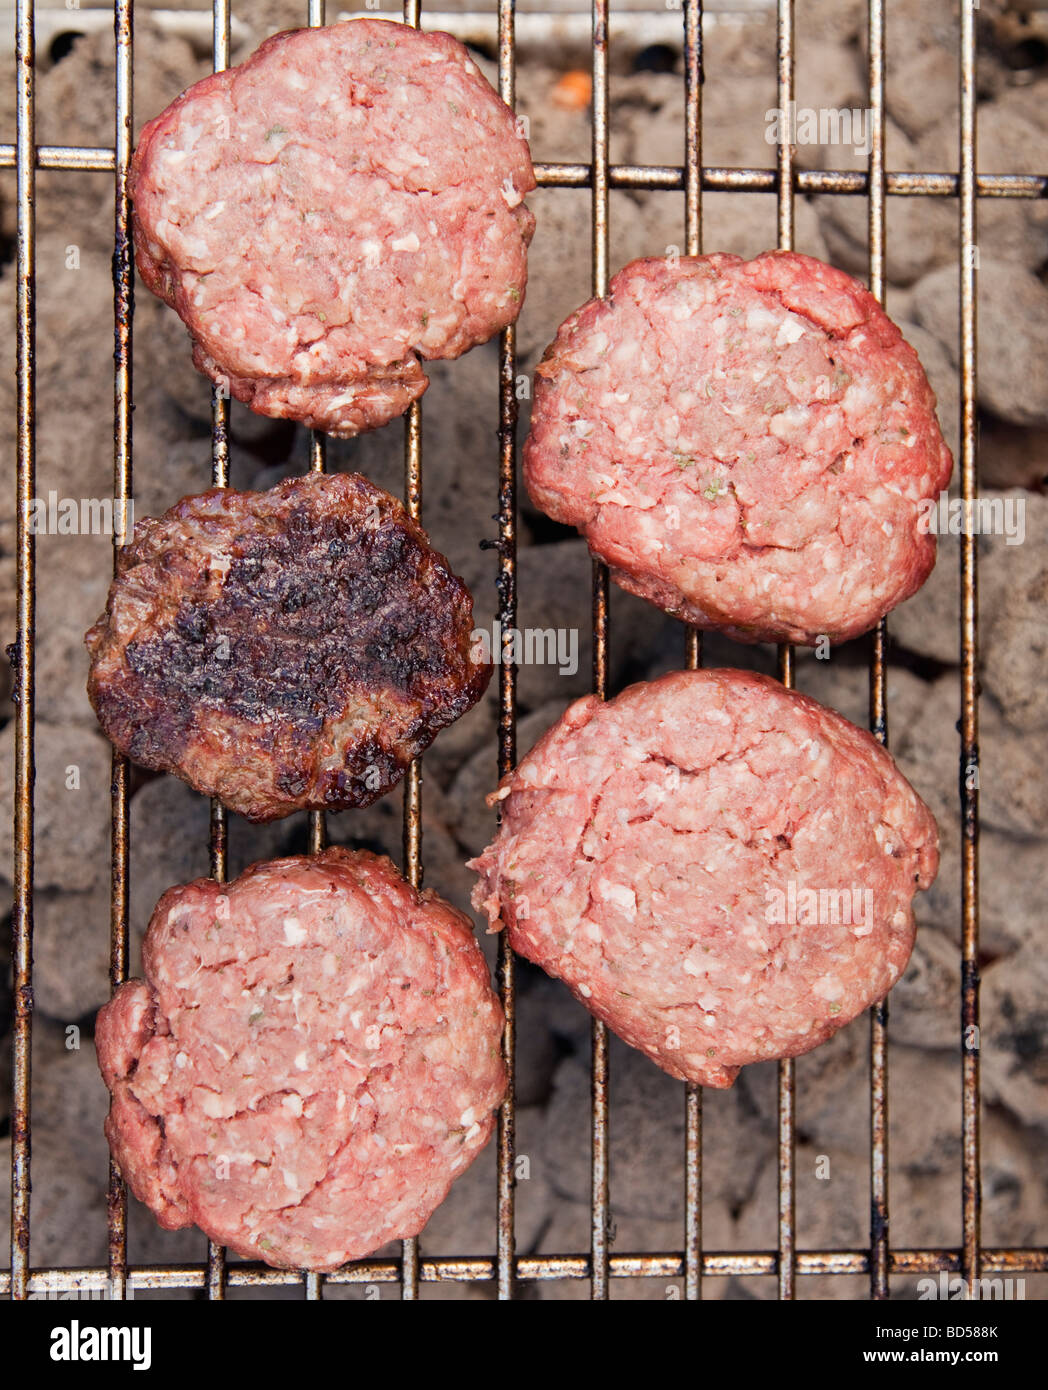 Hamburgers on a barbeque Stock Photo